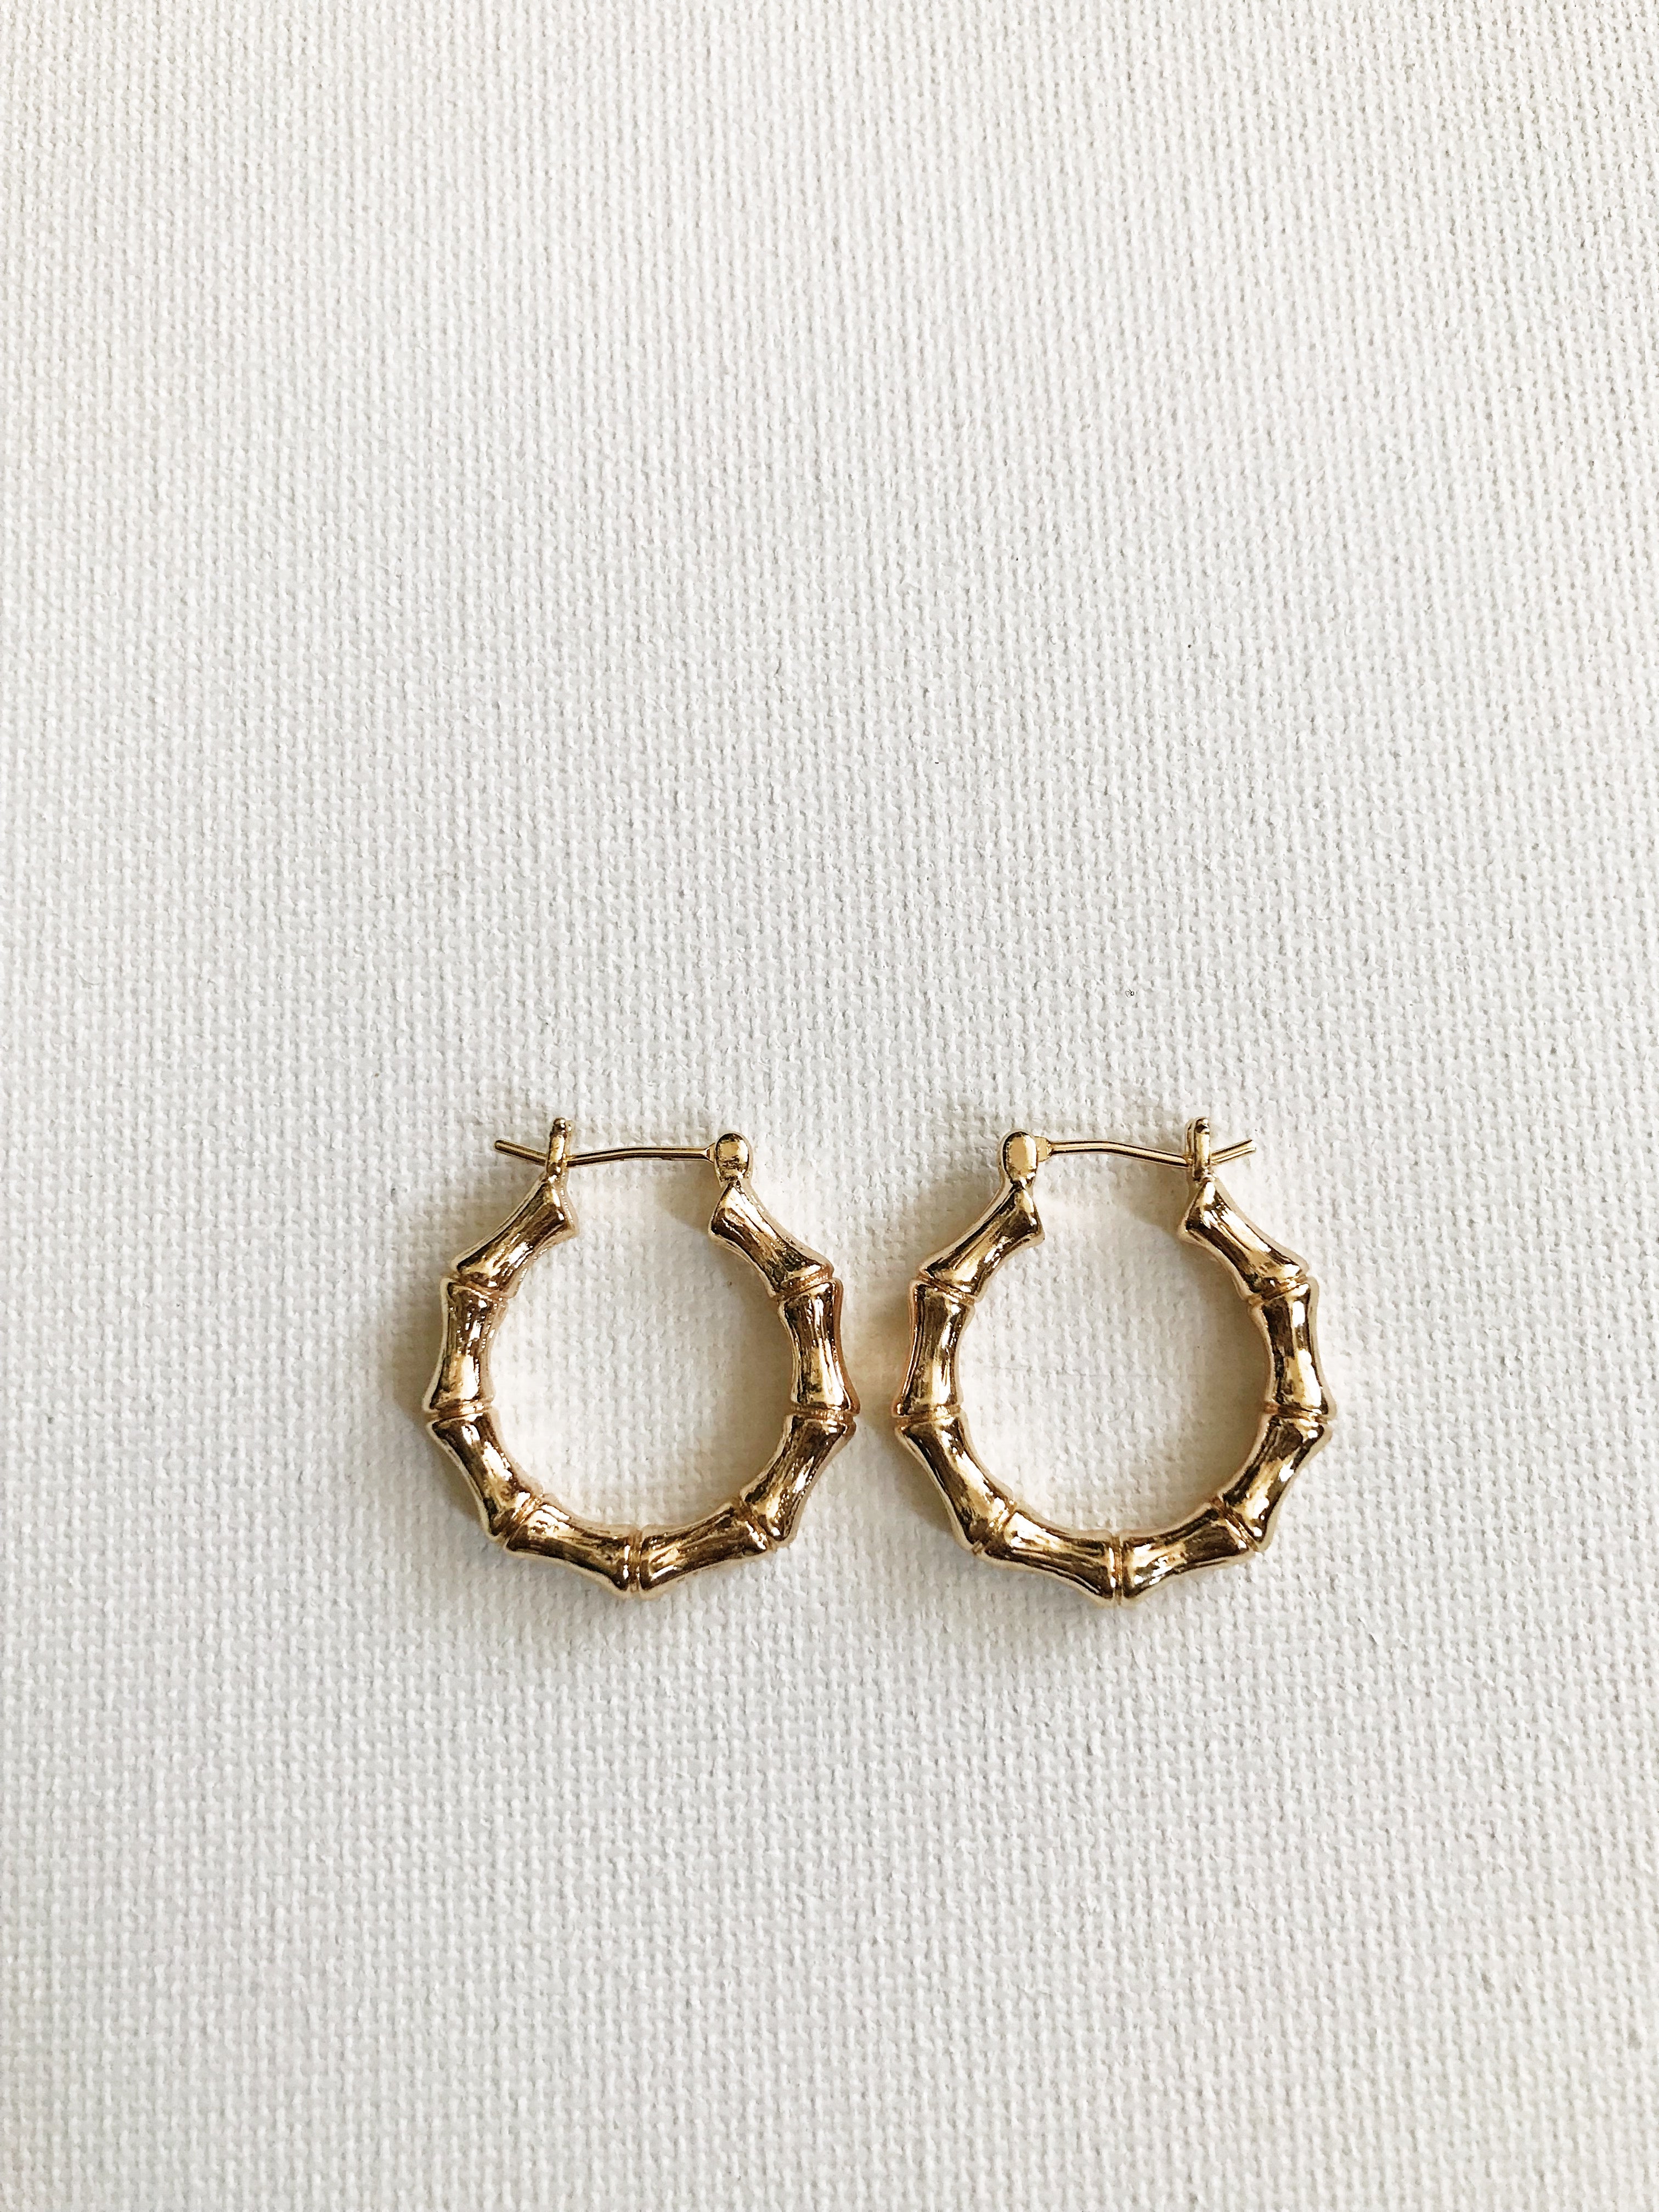 Fashion Small Hoop Earrings Designer For Women Accesories Bamboo Earrings  Simple Larg Gold Hoop Luxury Brand New Arrival  AliExpress